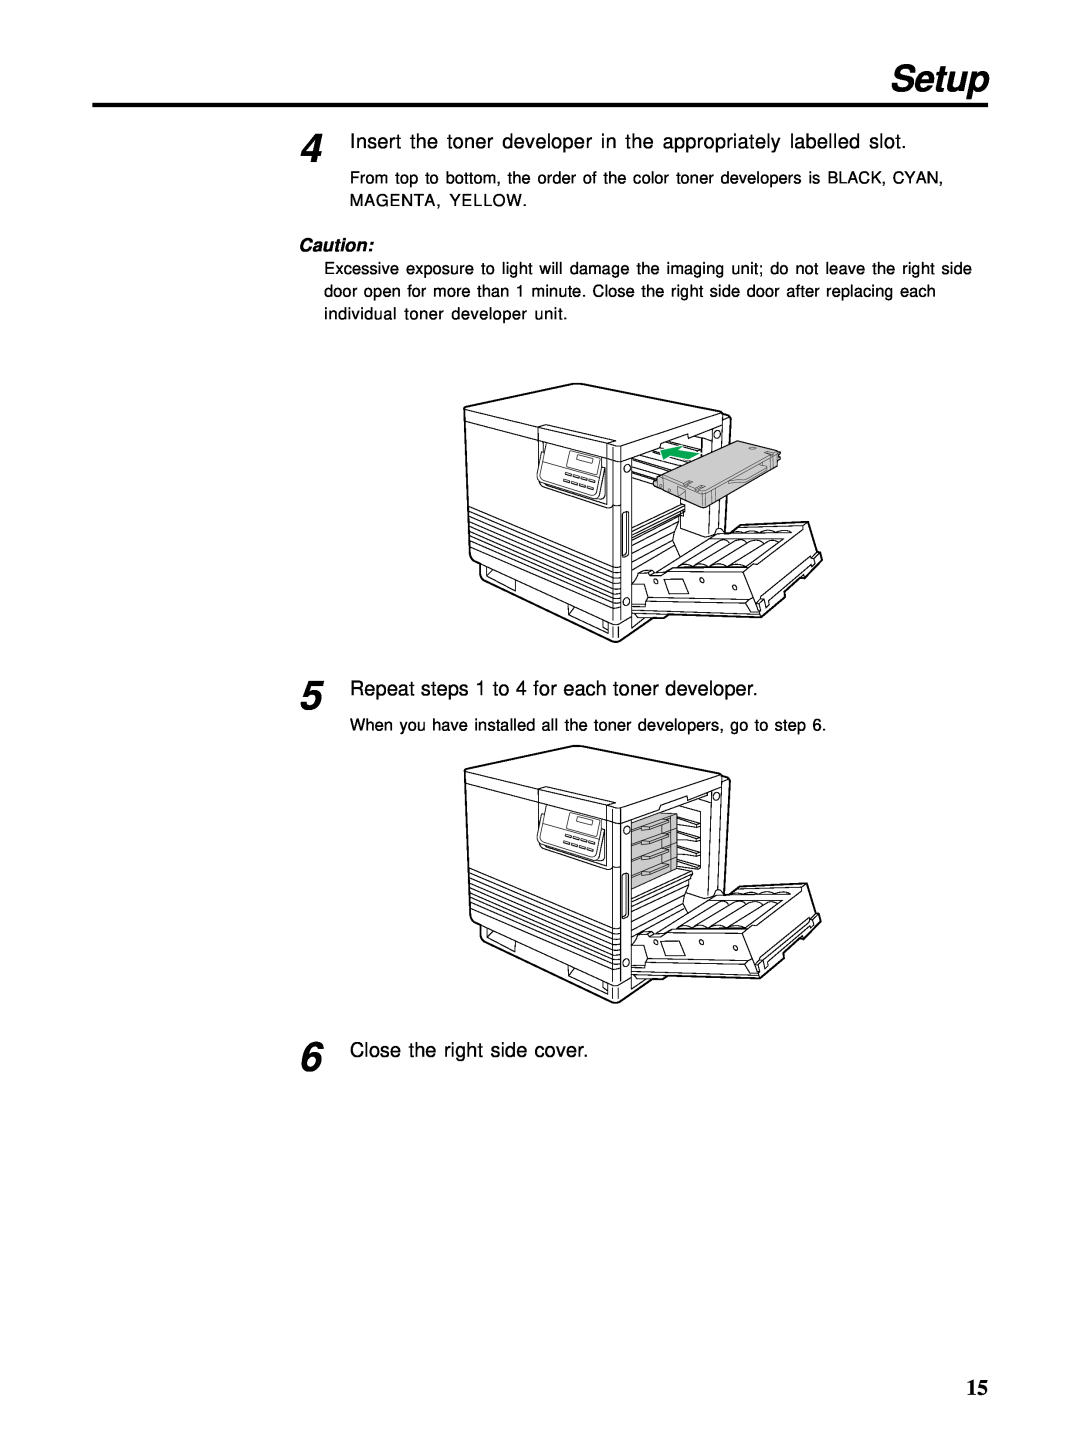 HP Ci 1100 manual Setup, Insert the toner developer in the appropriately labelled slot, Close the right side cover 